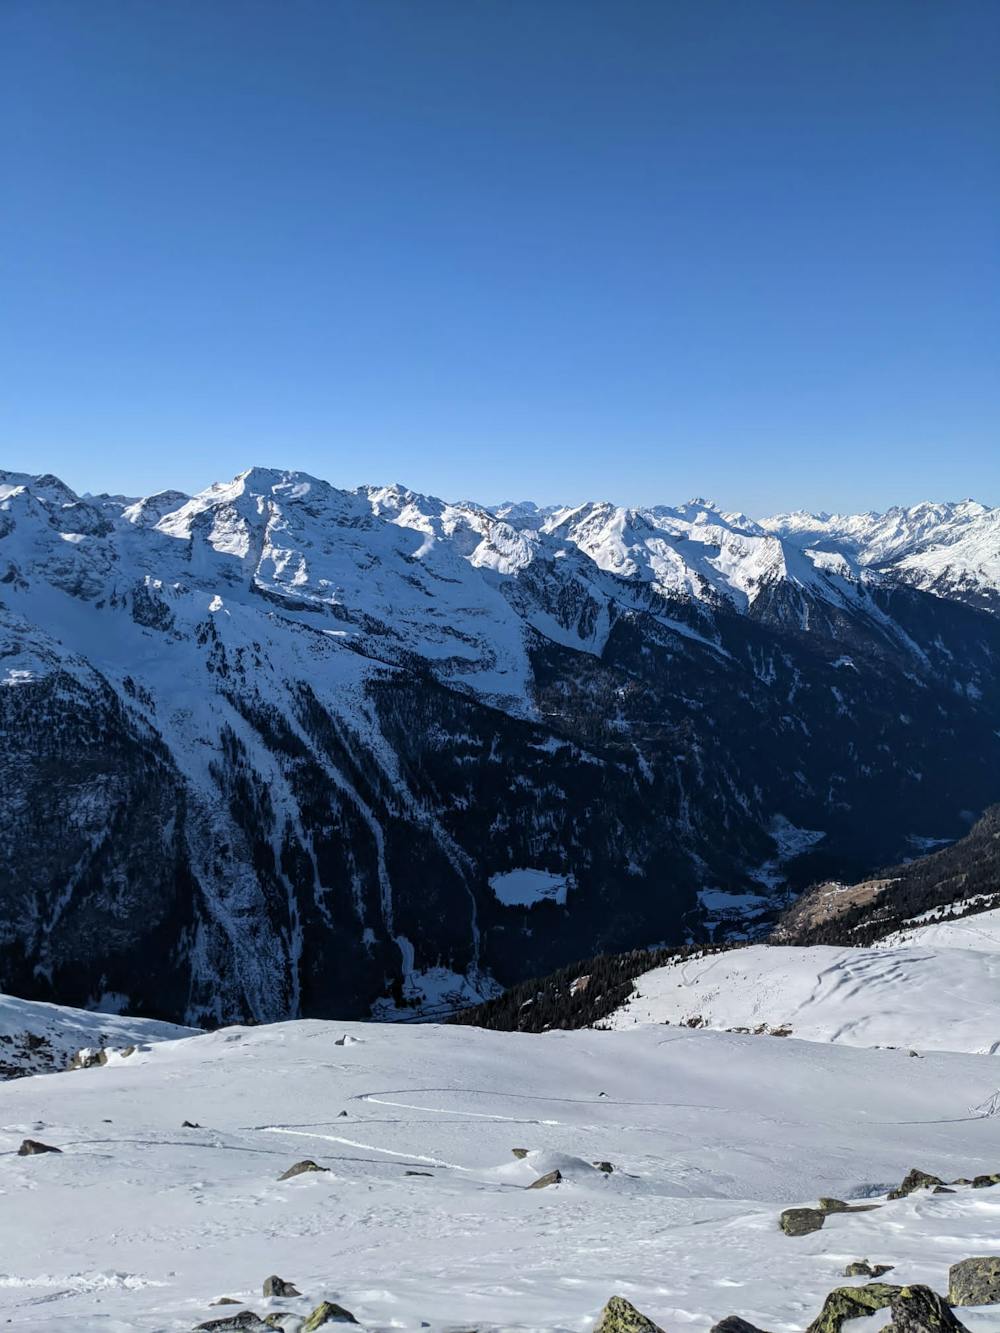 The entire tour offers a magnificent view of the mountains of the Pitztal valley (The entire tour offers a magnificent view of the mountains of the Pitztal valley (View direction: NW)